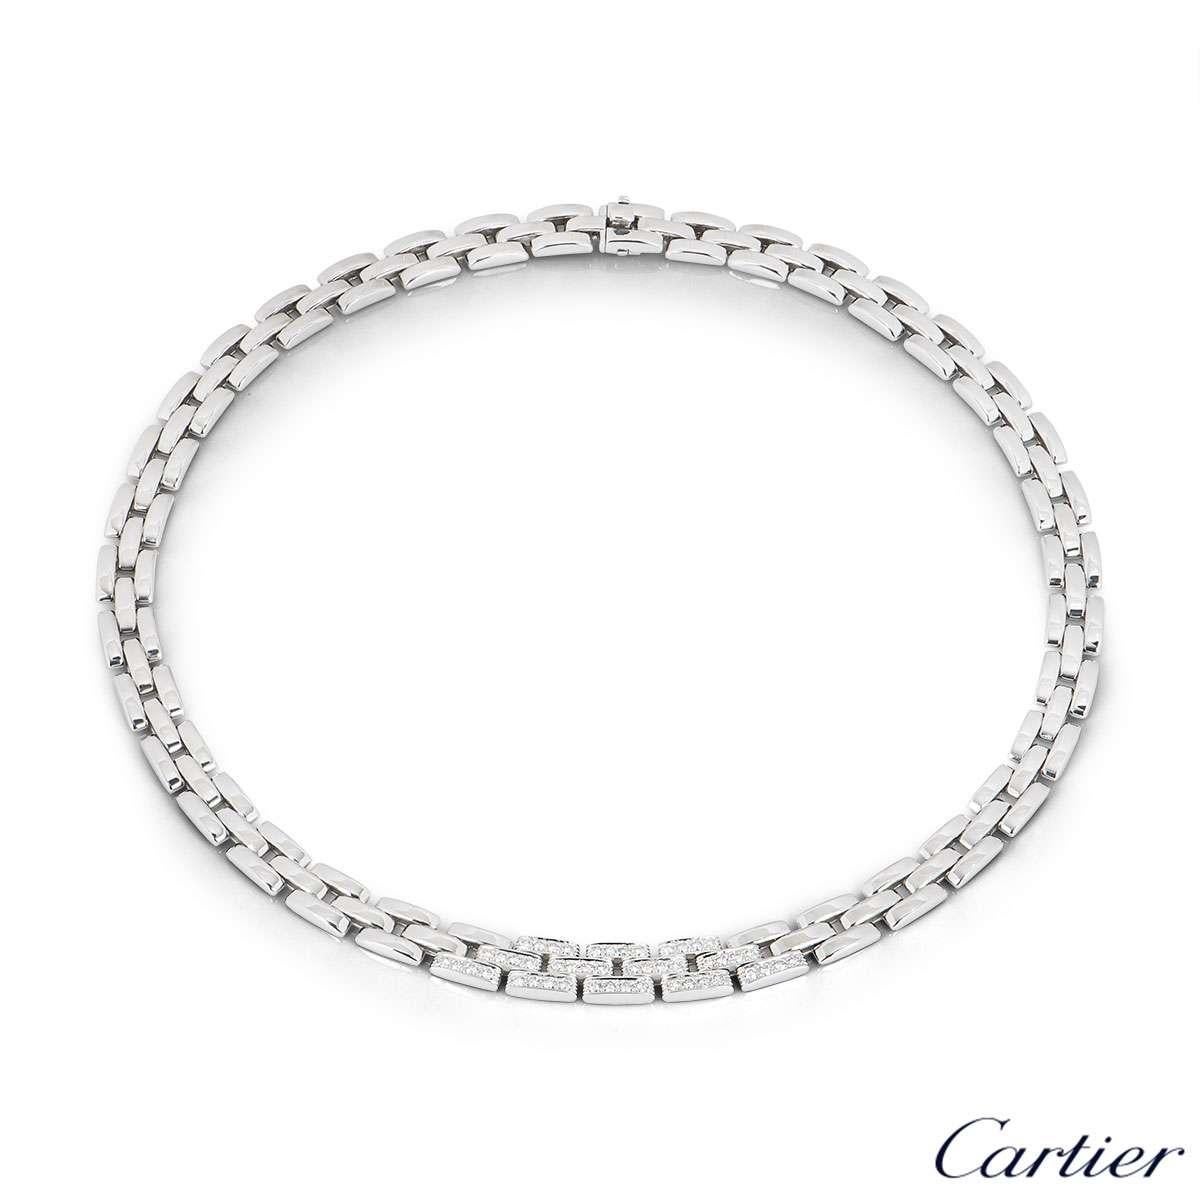 A beautiful 18k white gold diamond set necklace from the Cartier Maillon Panthere collection. The necklace is composed of iconic Maillon brick style links, complemented by a pave set diamond intersection set to the front. The necklace measures 15